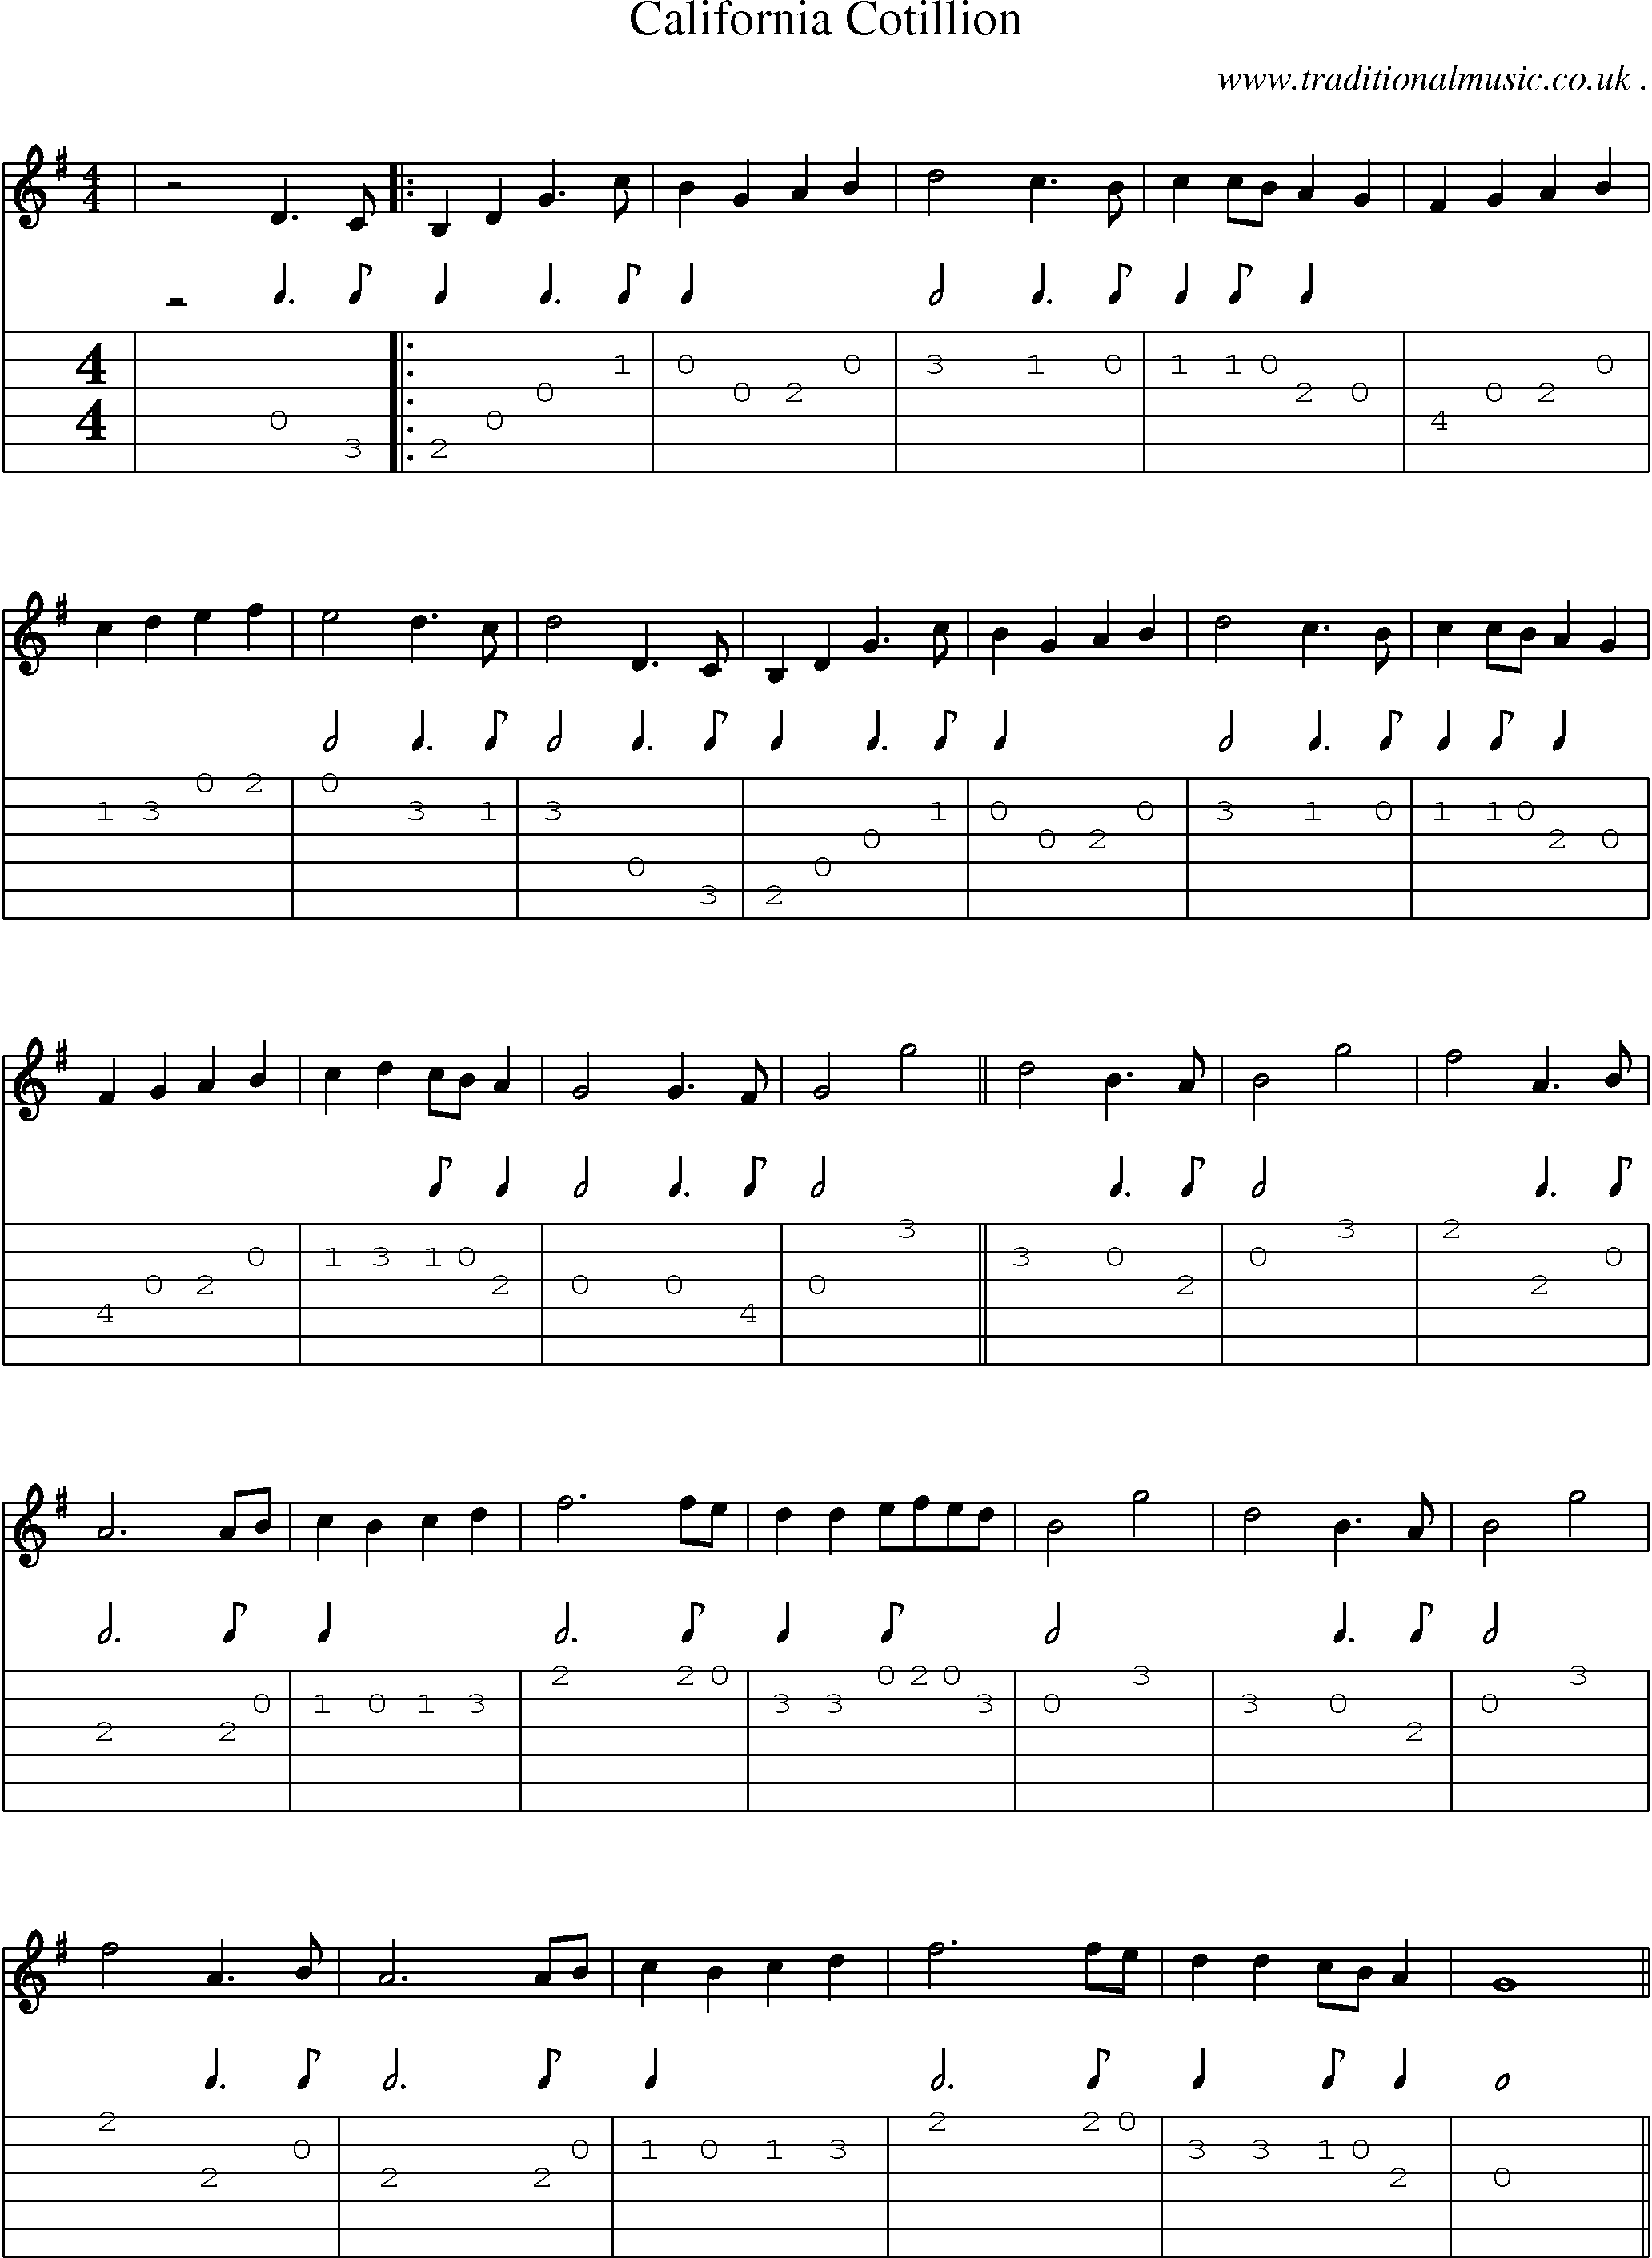 Music Score and Guitar Tabs for California Cotillion